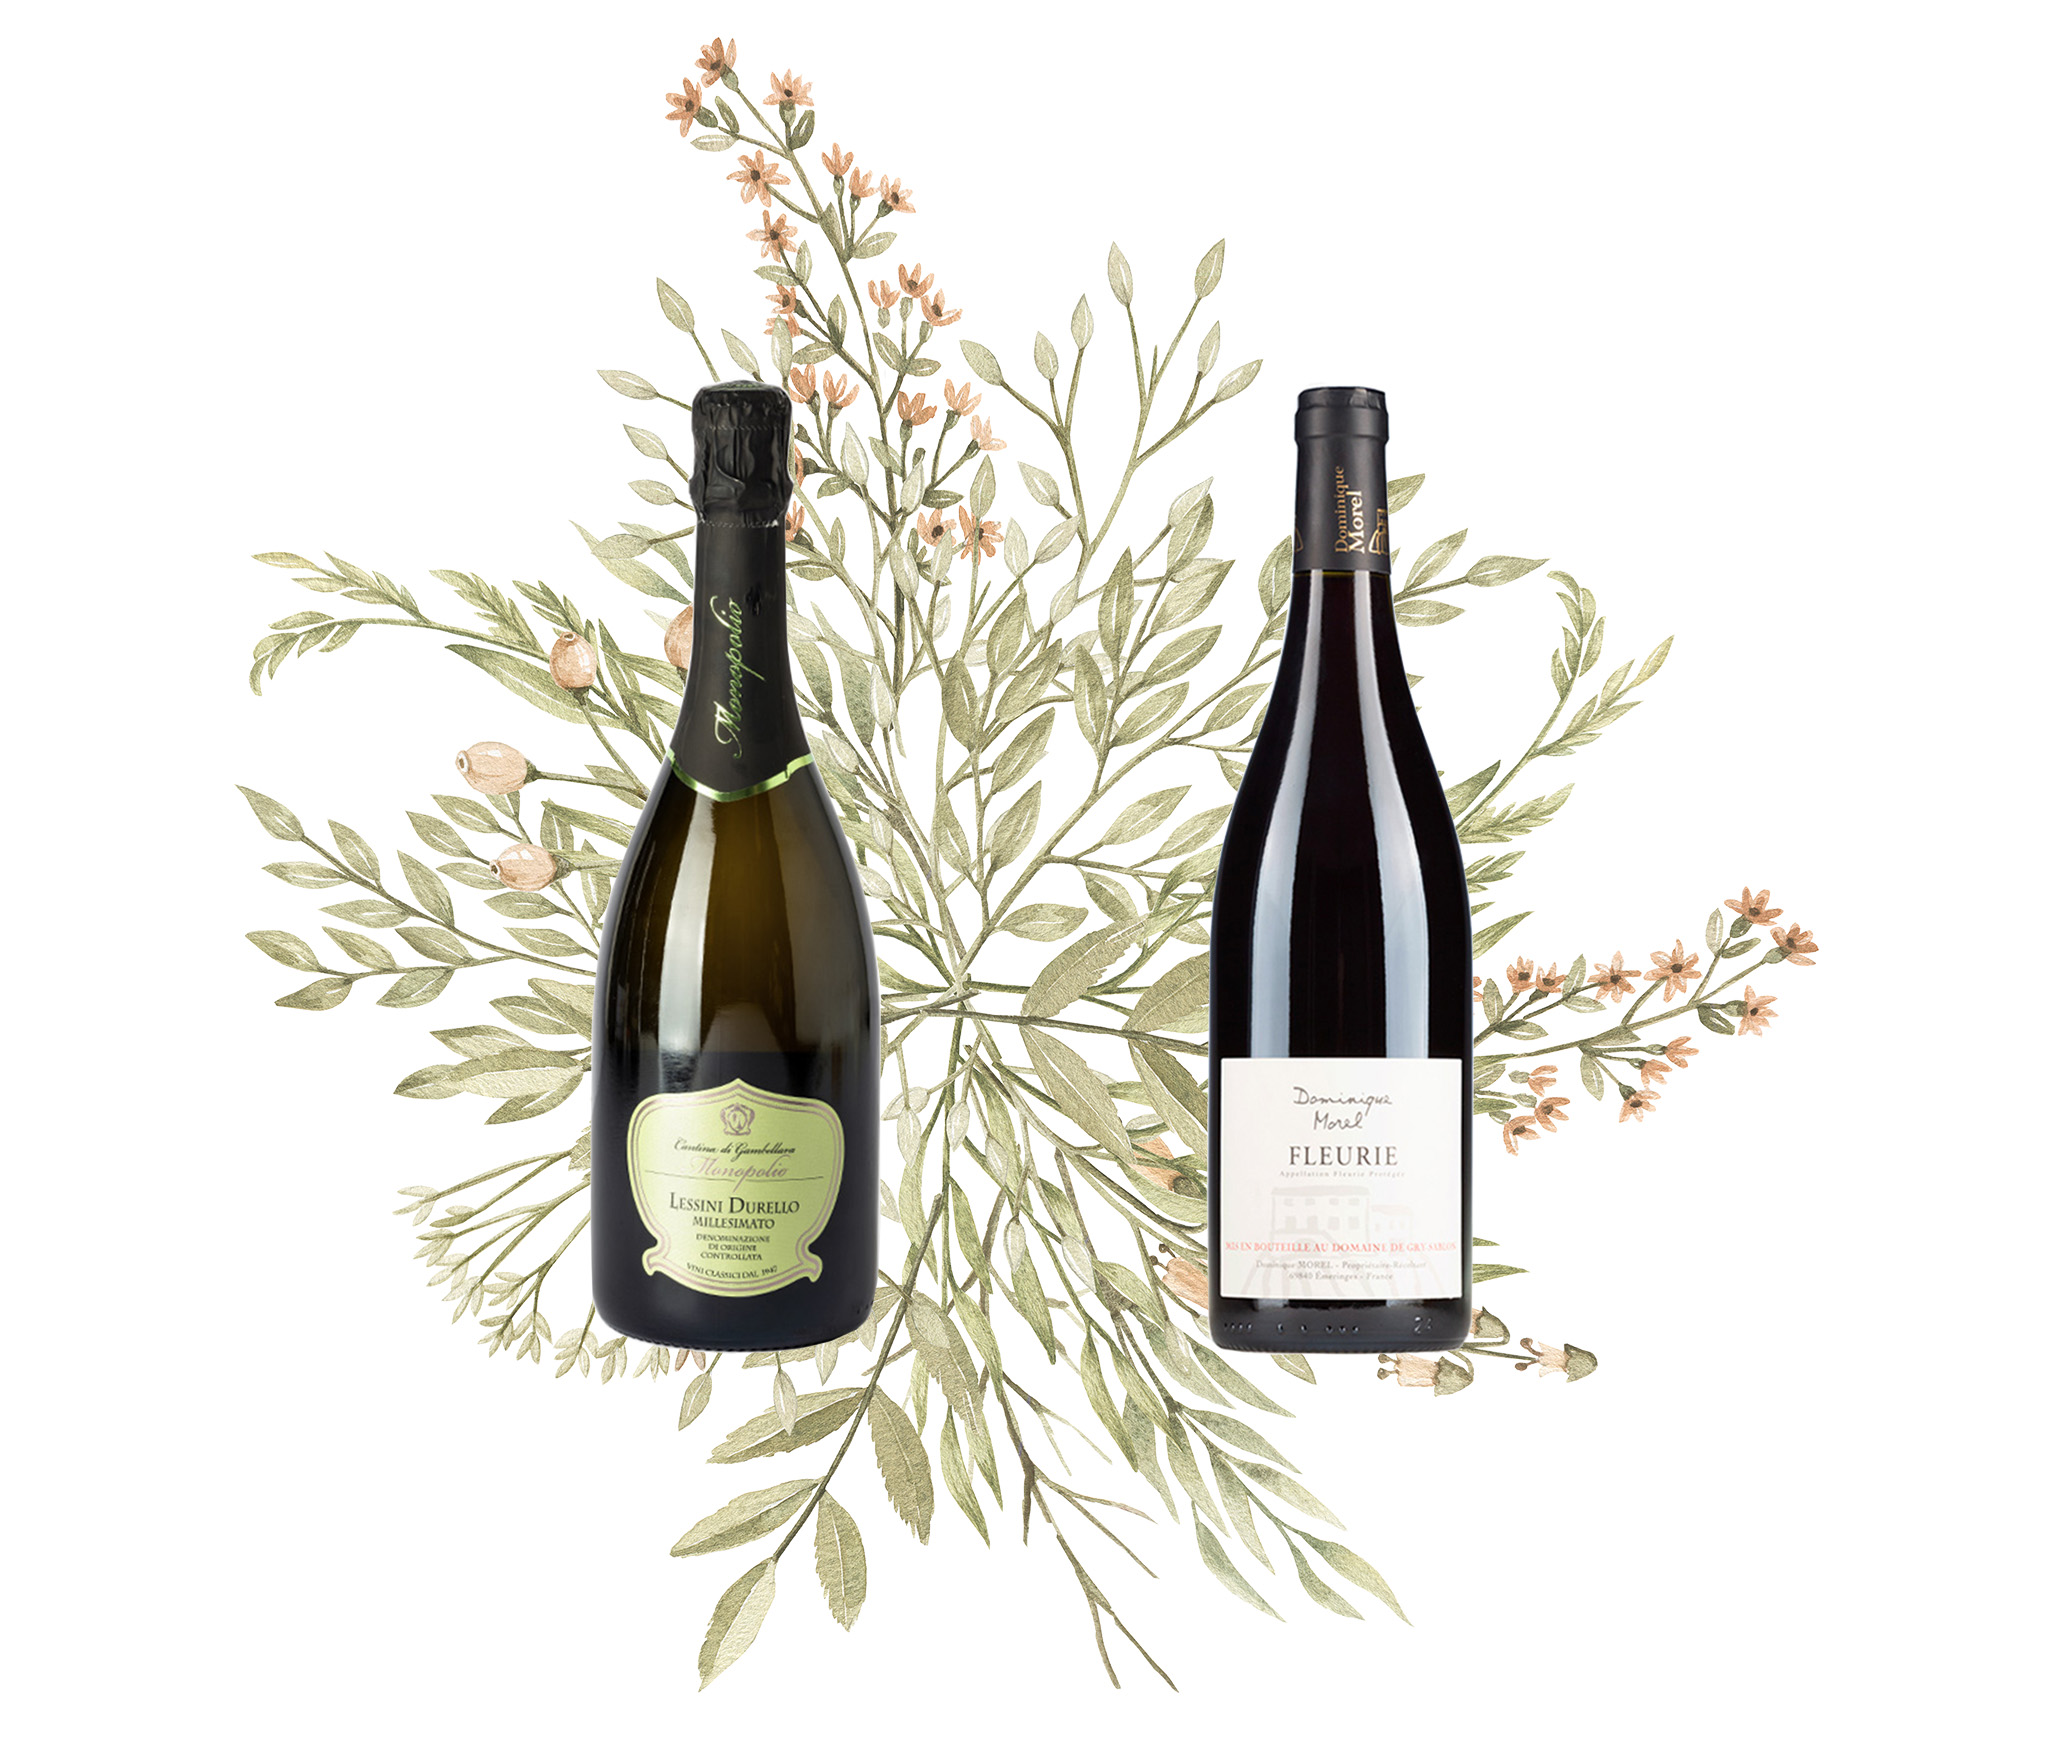 2019 Monopolio Durello Spumante and 2018 Fleurie with leaves decoration in greens